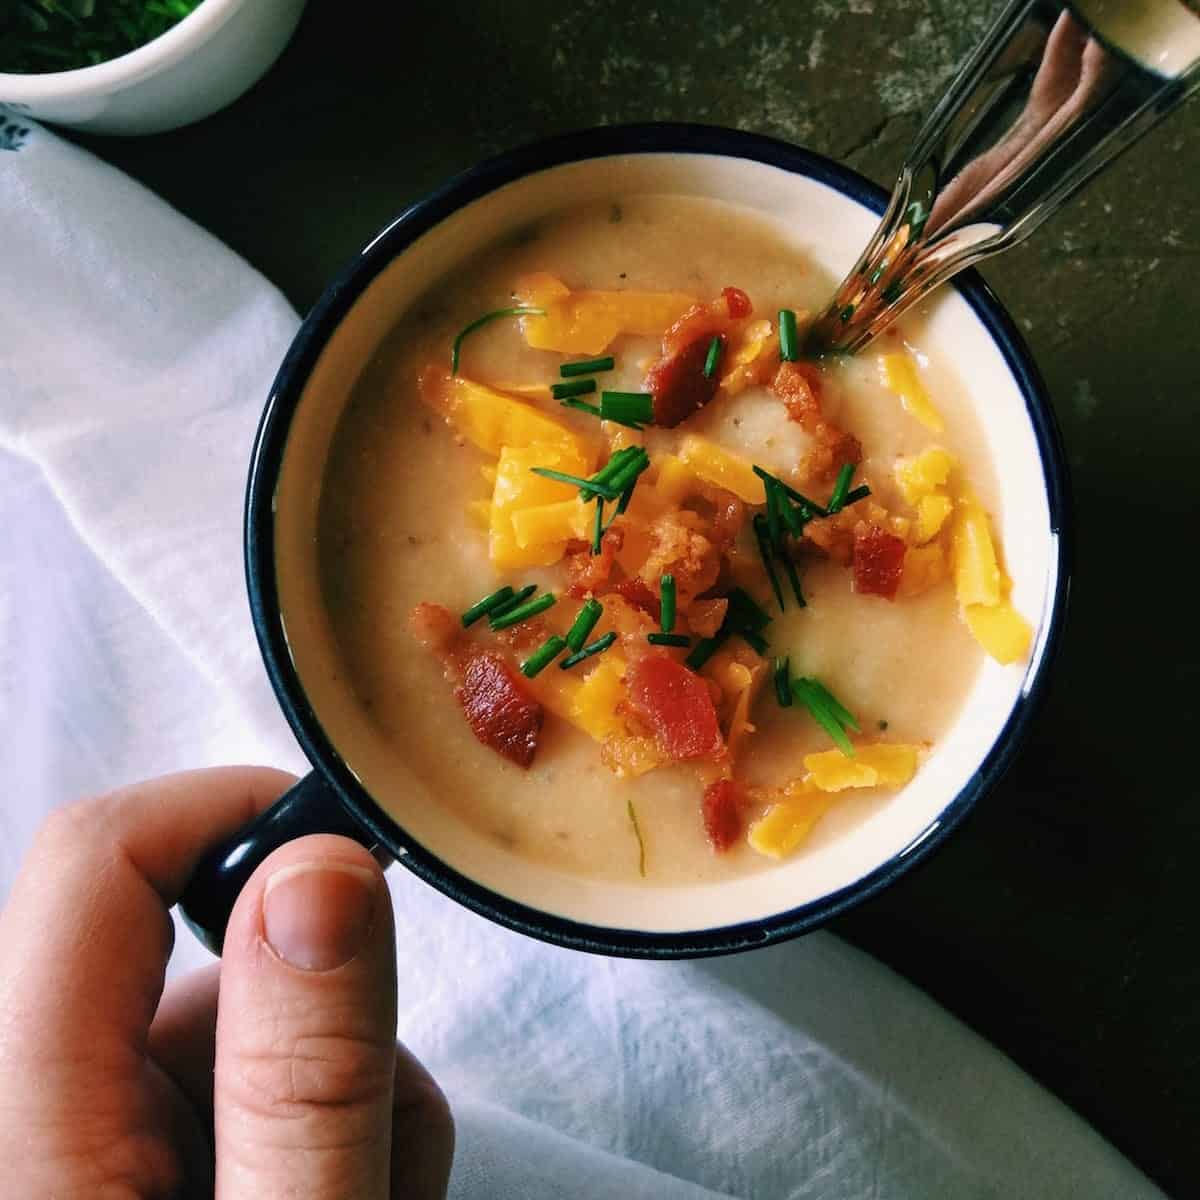 Baked Potato Soup. Healthy dinners kids can help to make.
